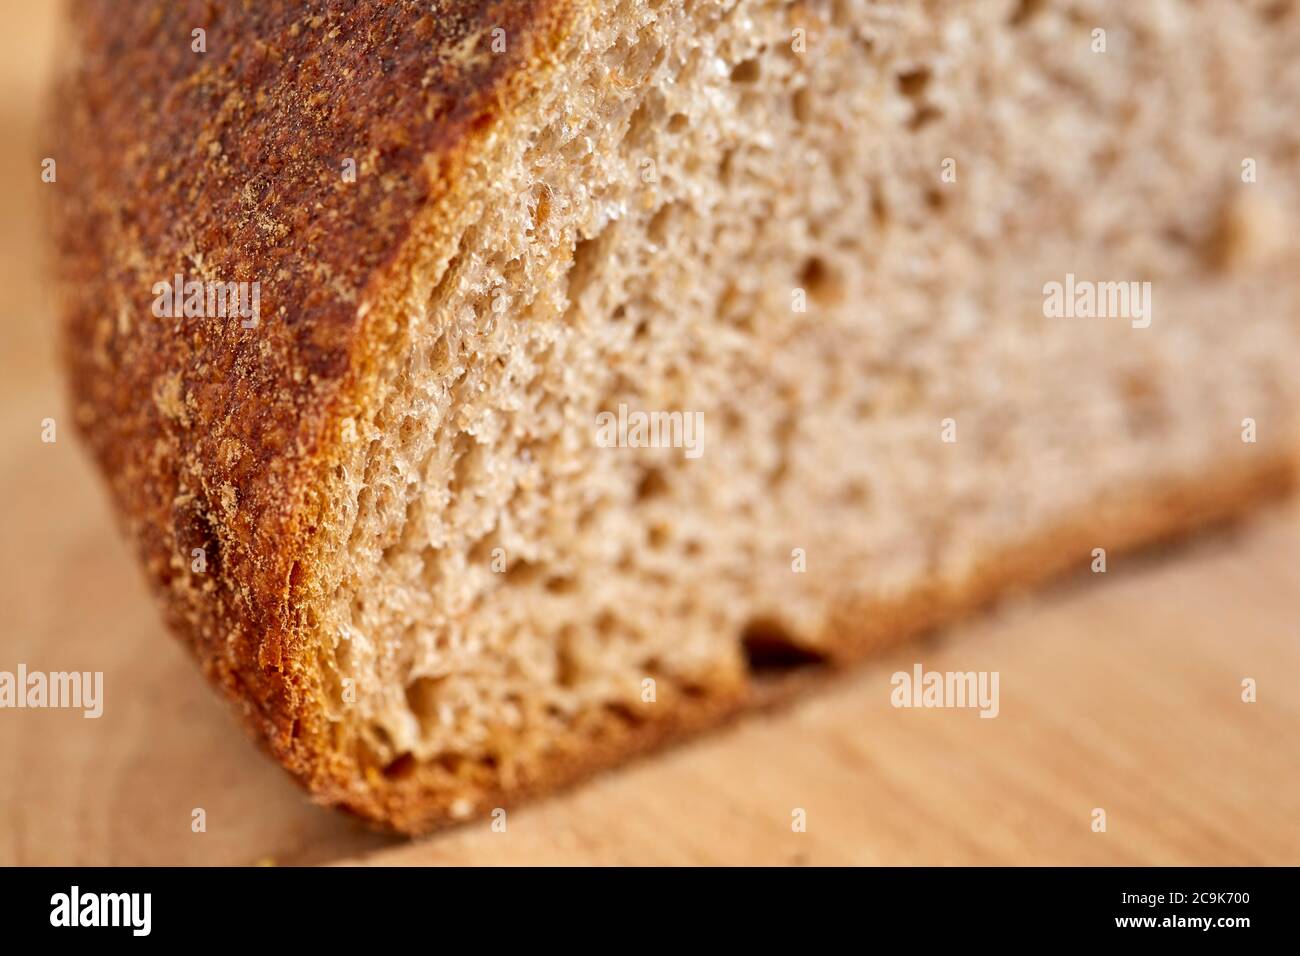 Loaf of sourdough, whole grain bread sliced open to reveal the inner crumb. Pennsylvania, USA Stock Photo